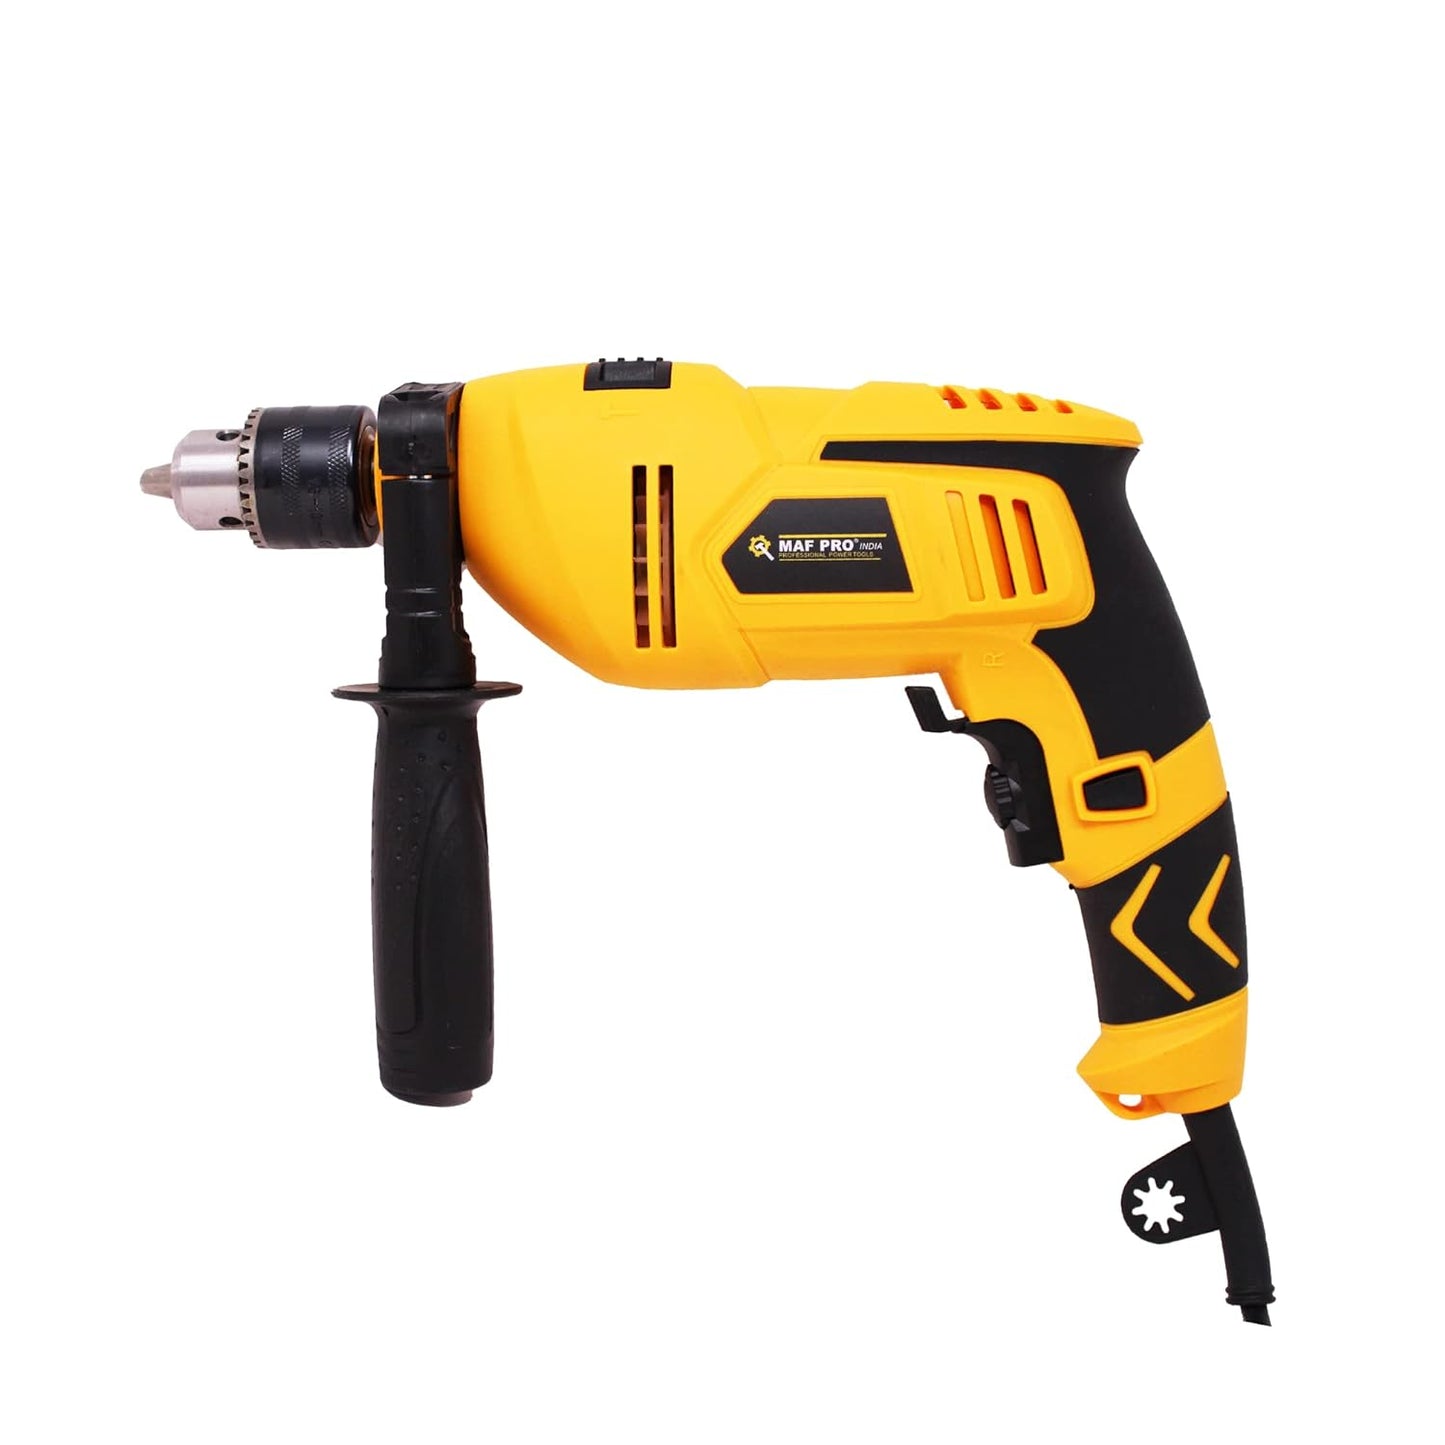 MAF PRO MPID-850W 13mm Electric Impact Drill Machine for Home Use with Copper Armature, Variable Speed Control, Reverse & Forward Function (RPM) & mm Chuck